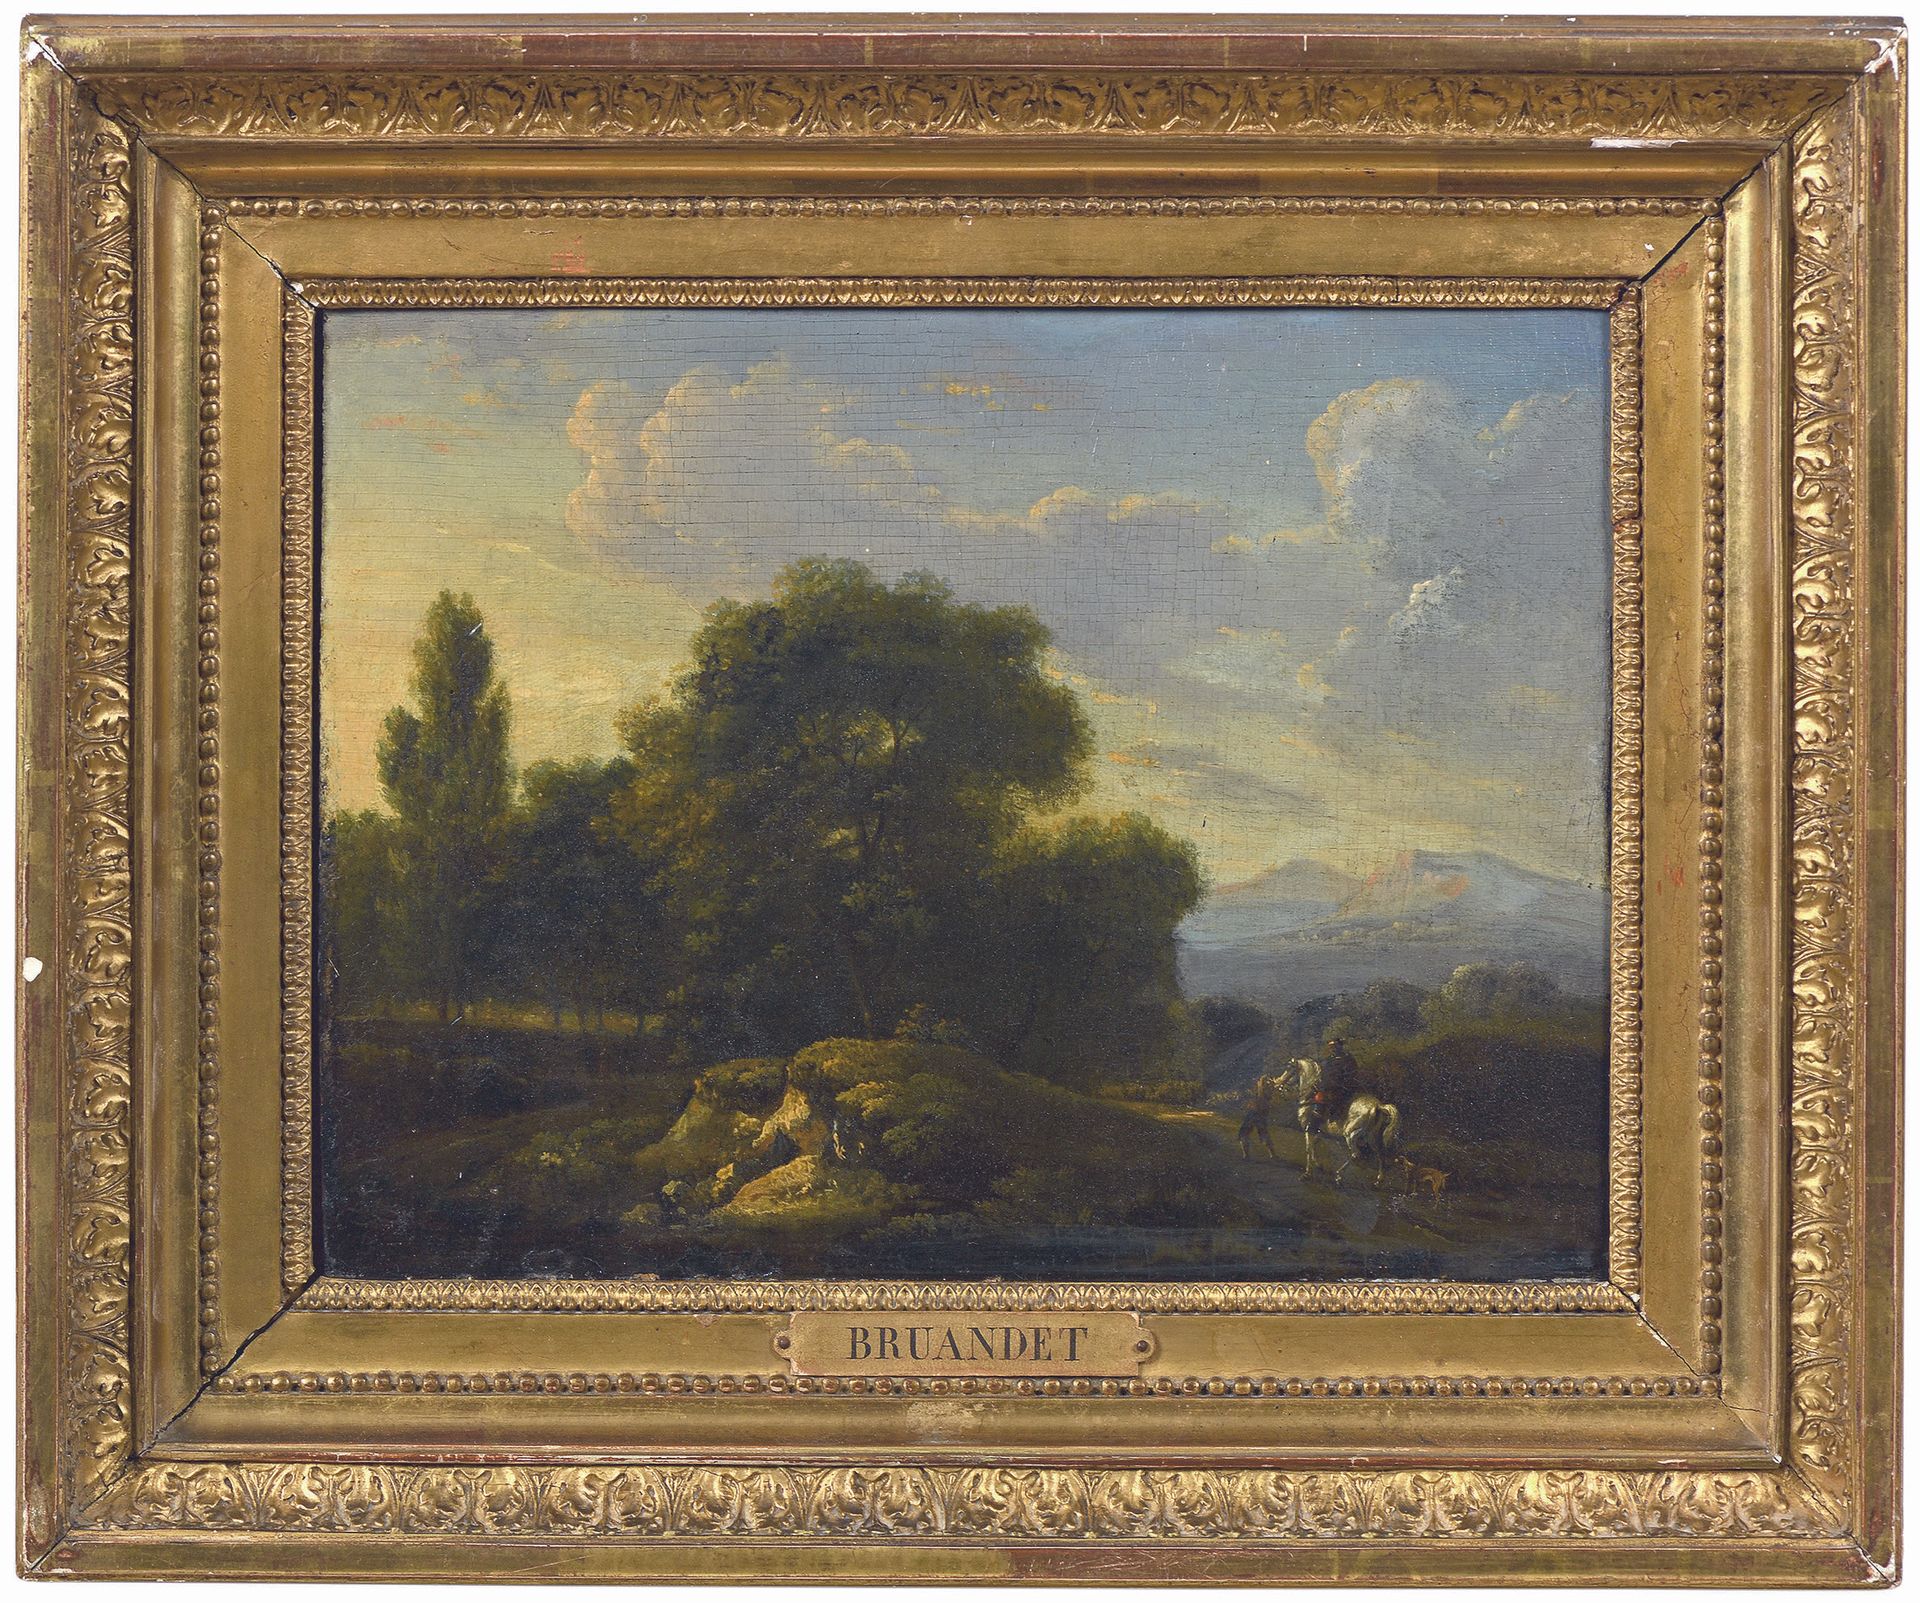 Null Lazare BRUANDET (1755-1804)
Animated landscape of characters
Oil on panel.
&hellip;